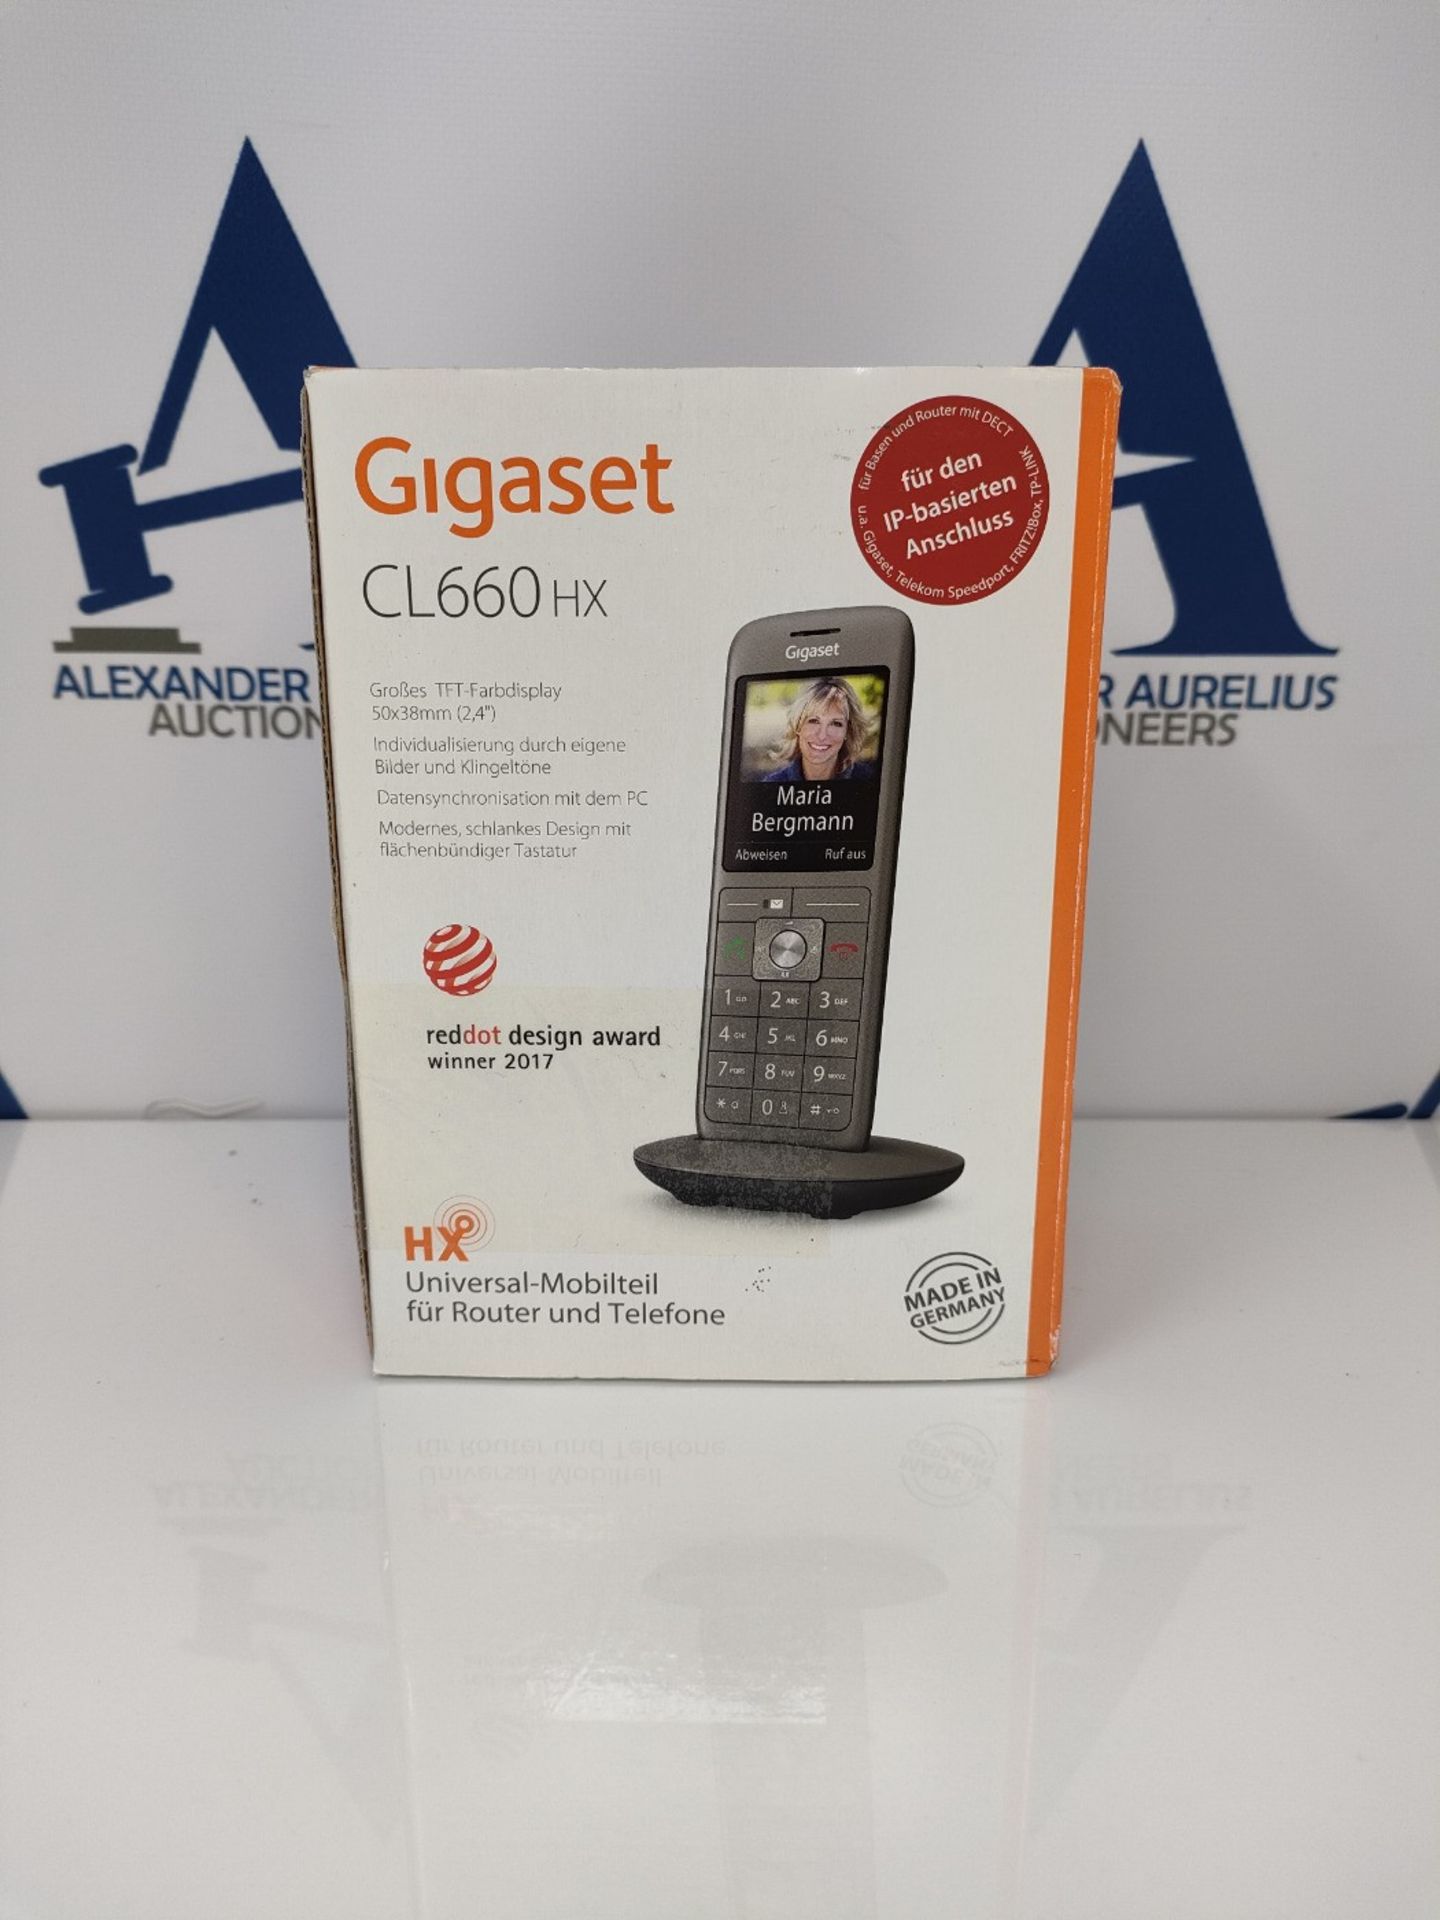 RRP £64.00 Gigaset CL660HX - DECT telephone cordless for router - Fritzbox, Speedport compatible - Image 2 of 3